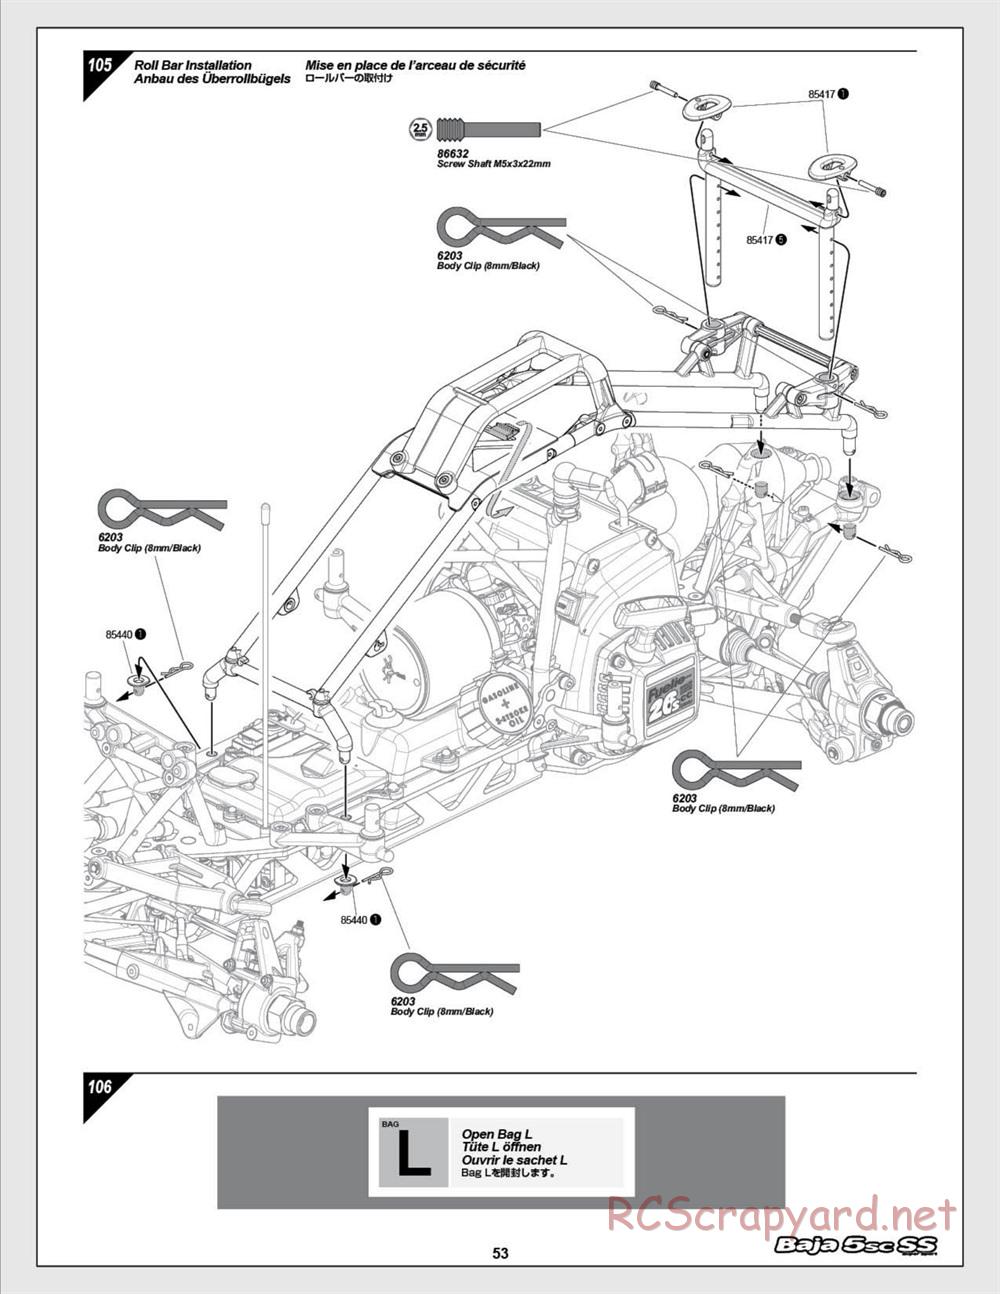 HPI - Baja 5SC SS - Exploded View - Page 53